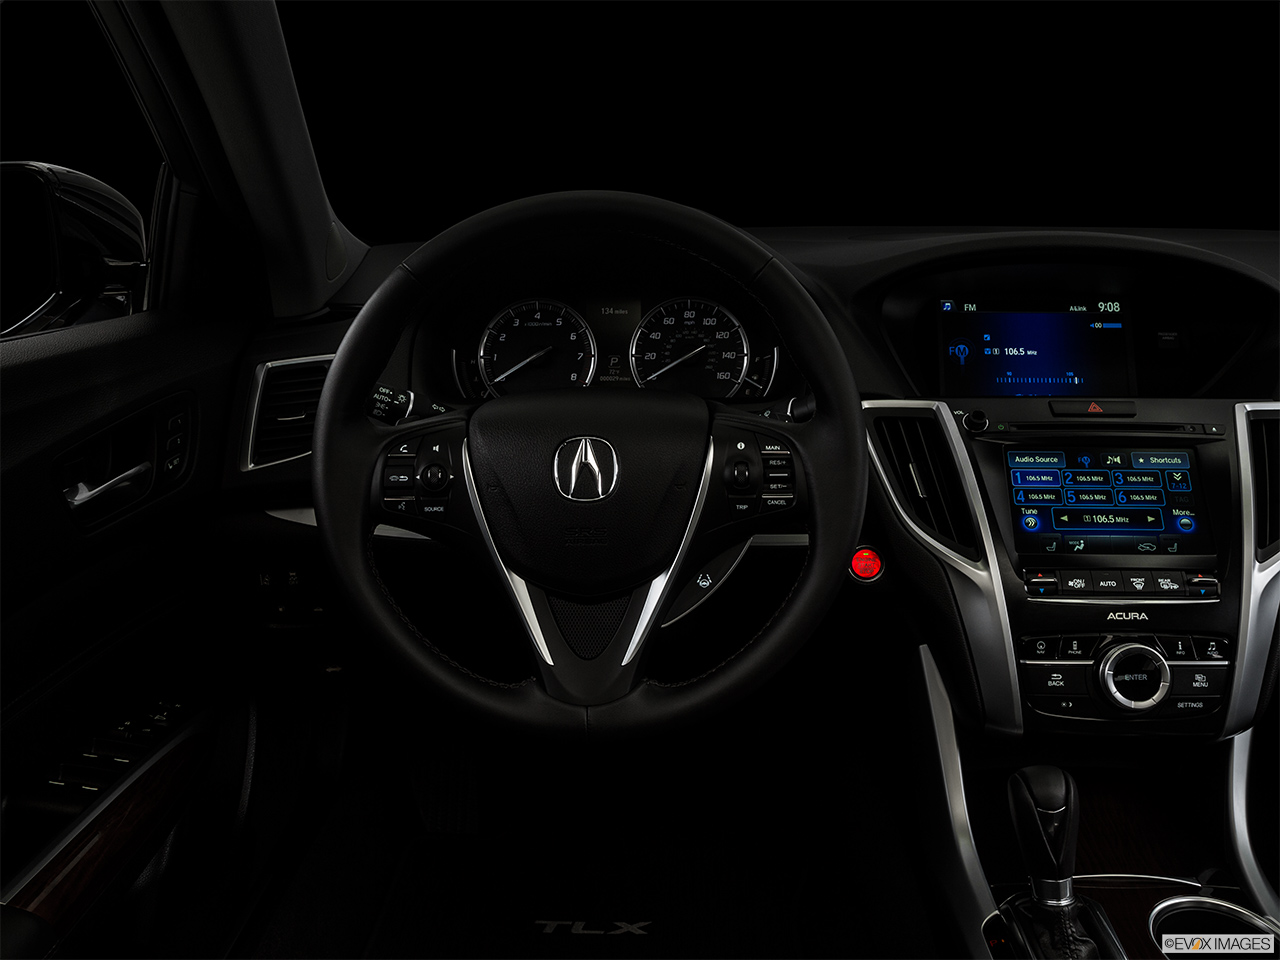 2015 Acura TLX 2.4 8-DCP P-AWS Centered wide dash shot - "night" shot. 